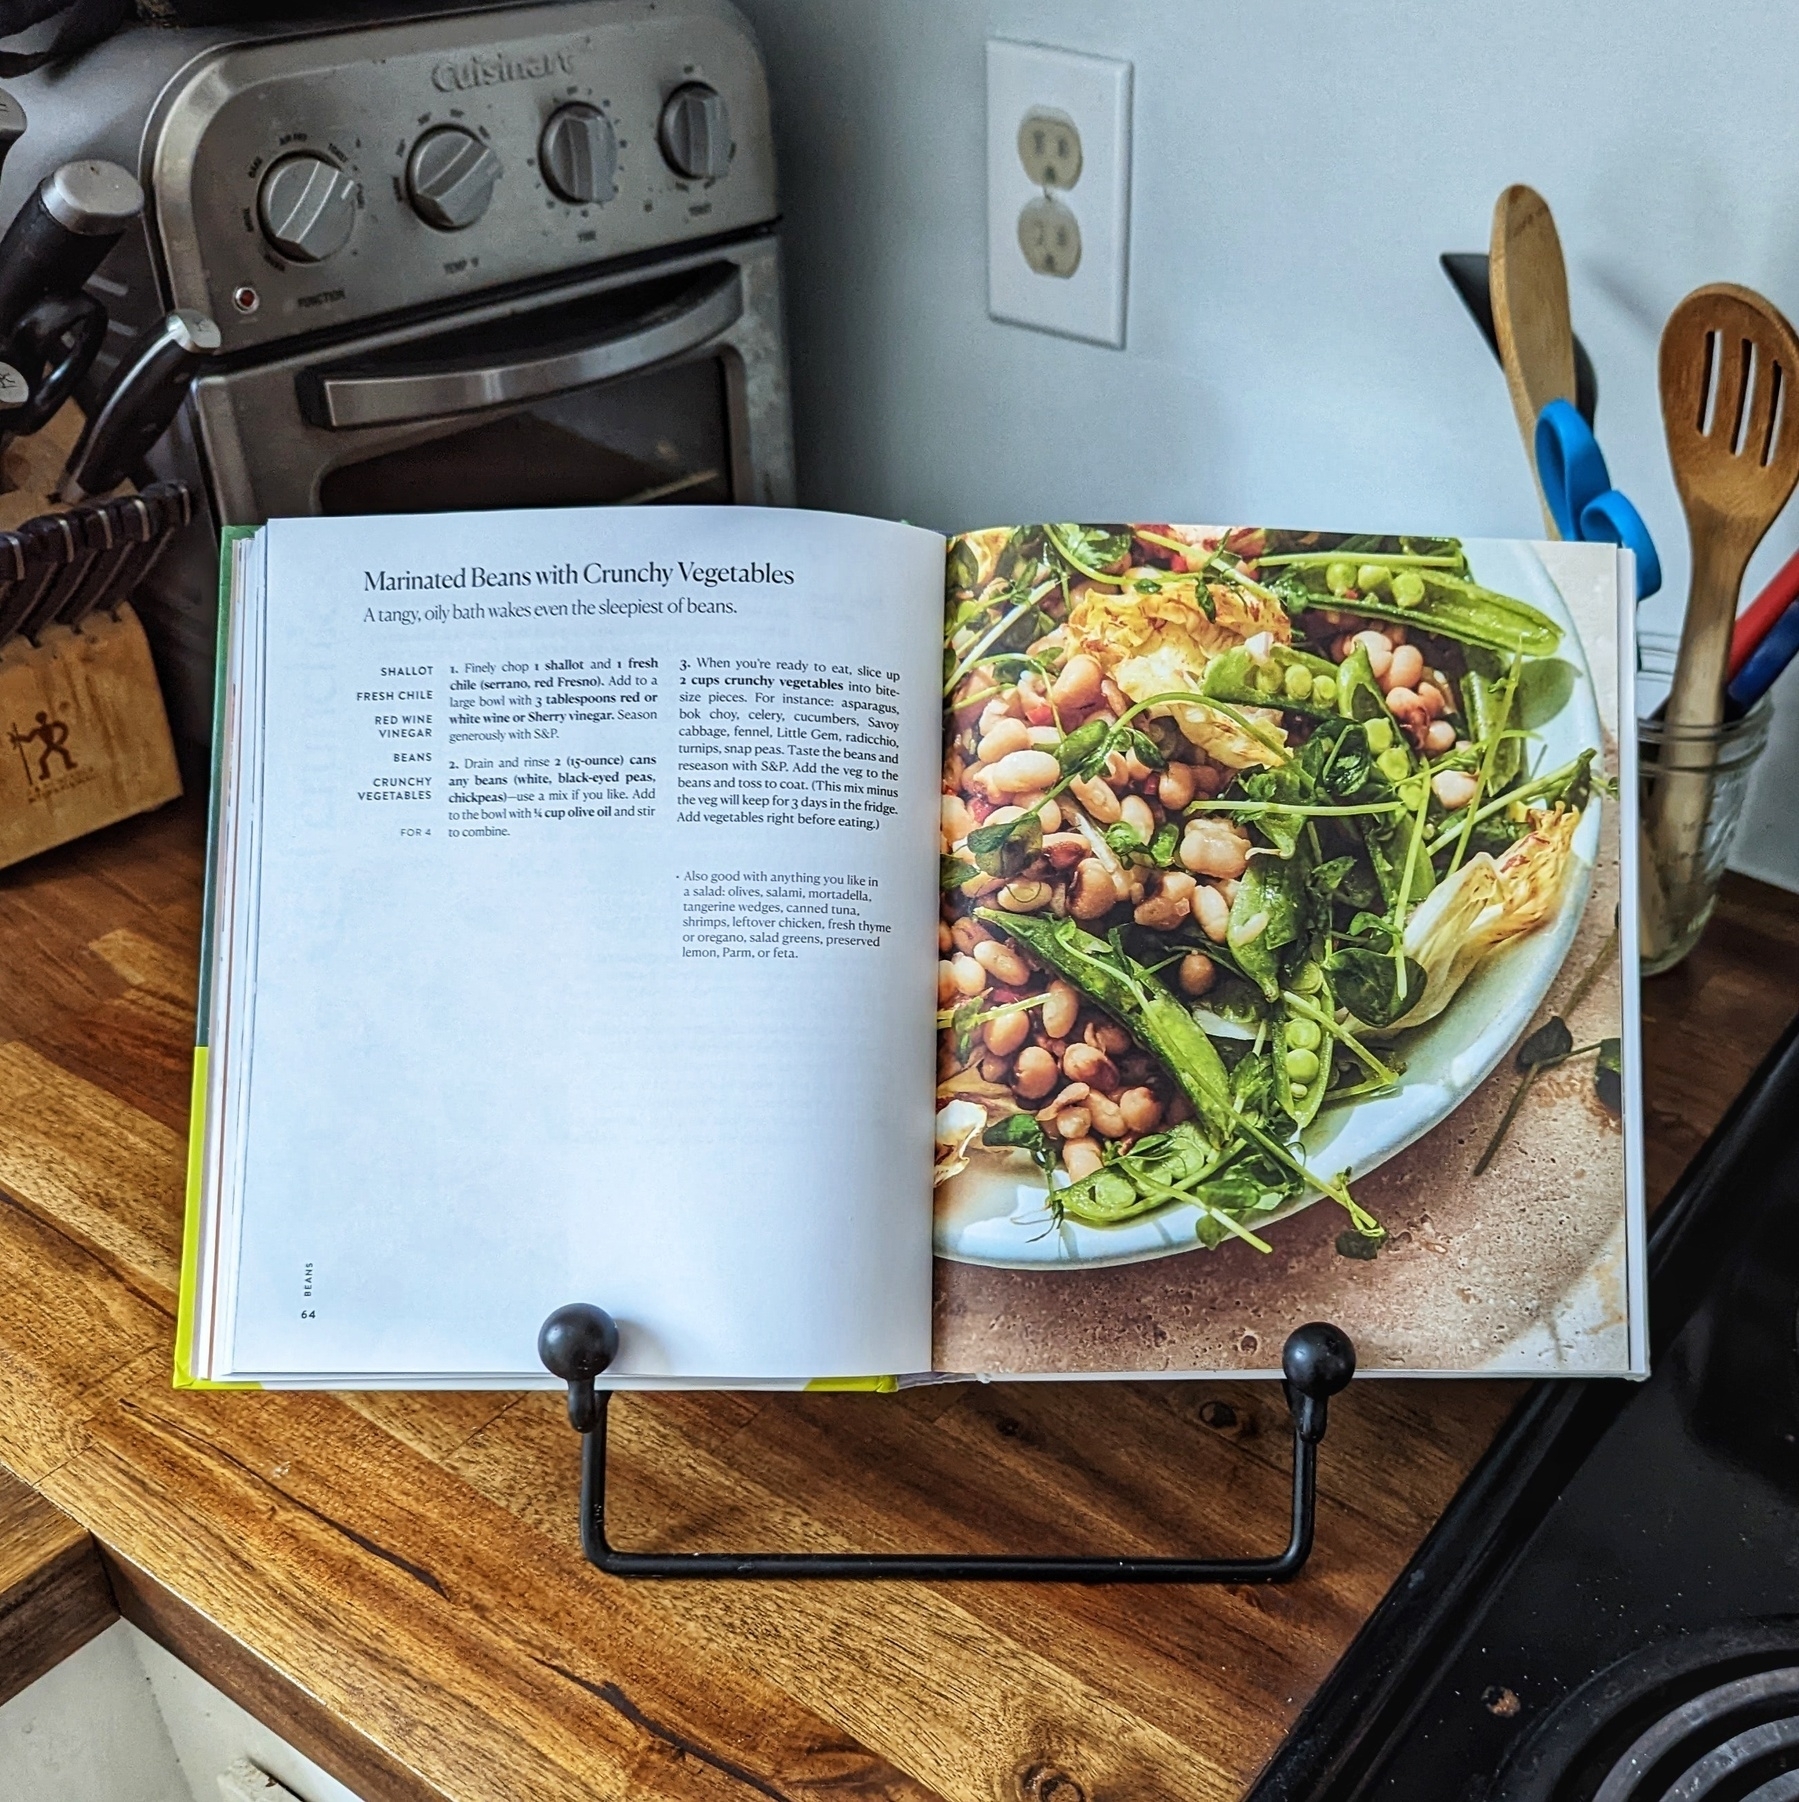 The cookbook I Dream of Dinner So You Don't Have To opened to the page of Marinated Beans with Crunchy Veggies